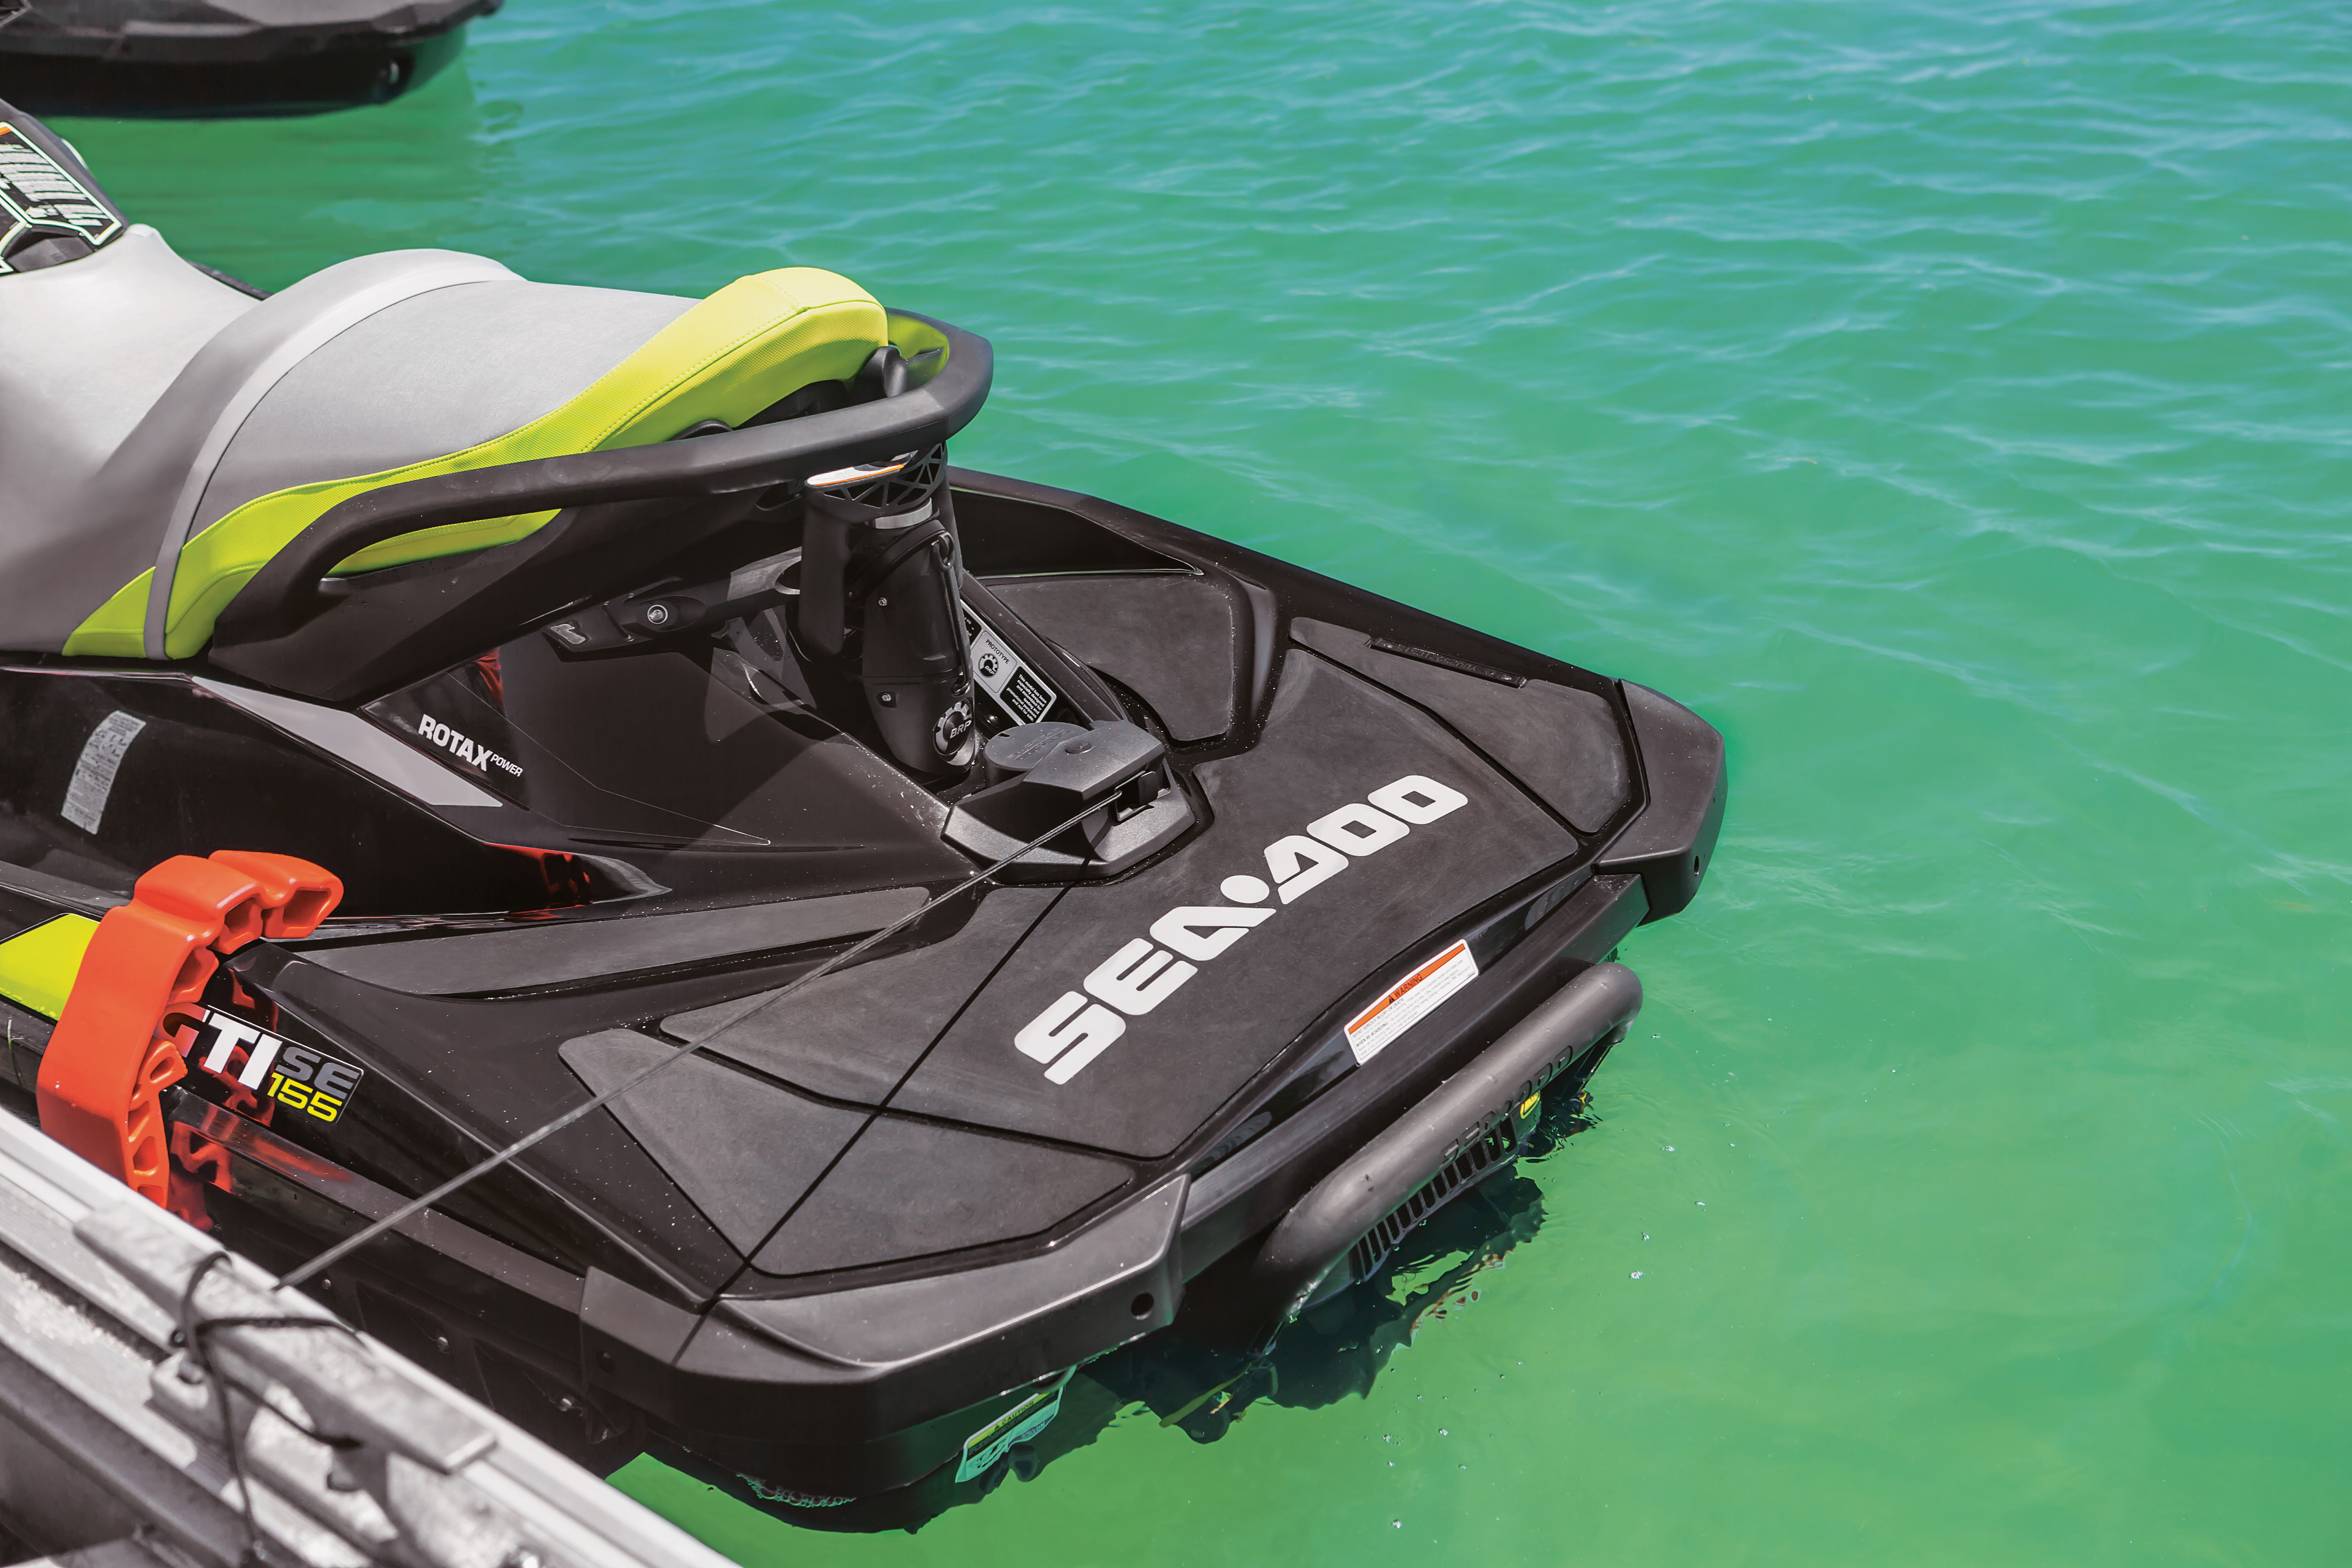 Top 5 Must-Have Accessories for Your Jet Ski